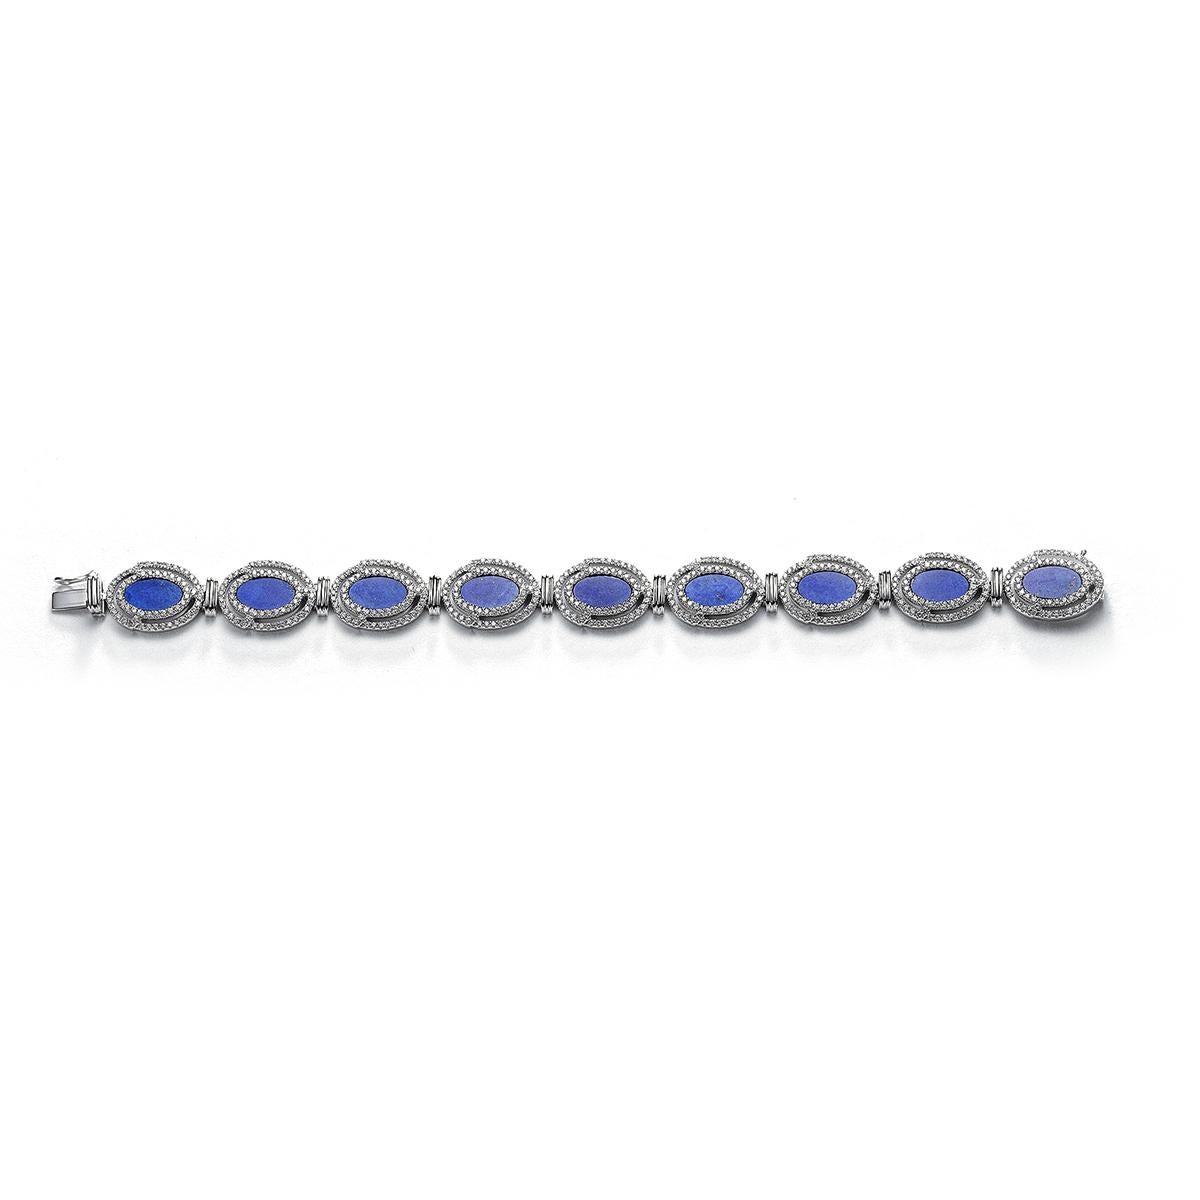 Bracelet in 18kt white gold set with 549 diamonds 3.11 cts and 9 lapis lazuli 8.62 cts       